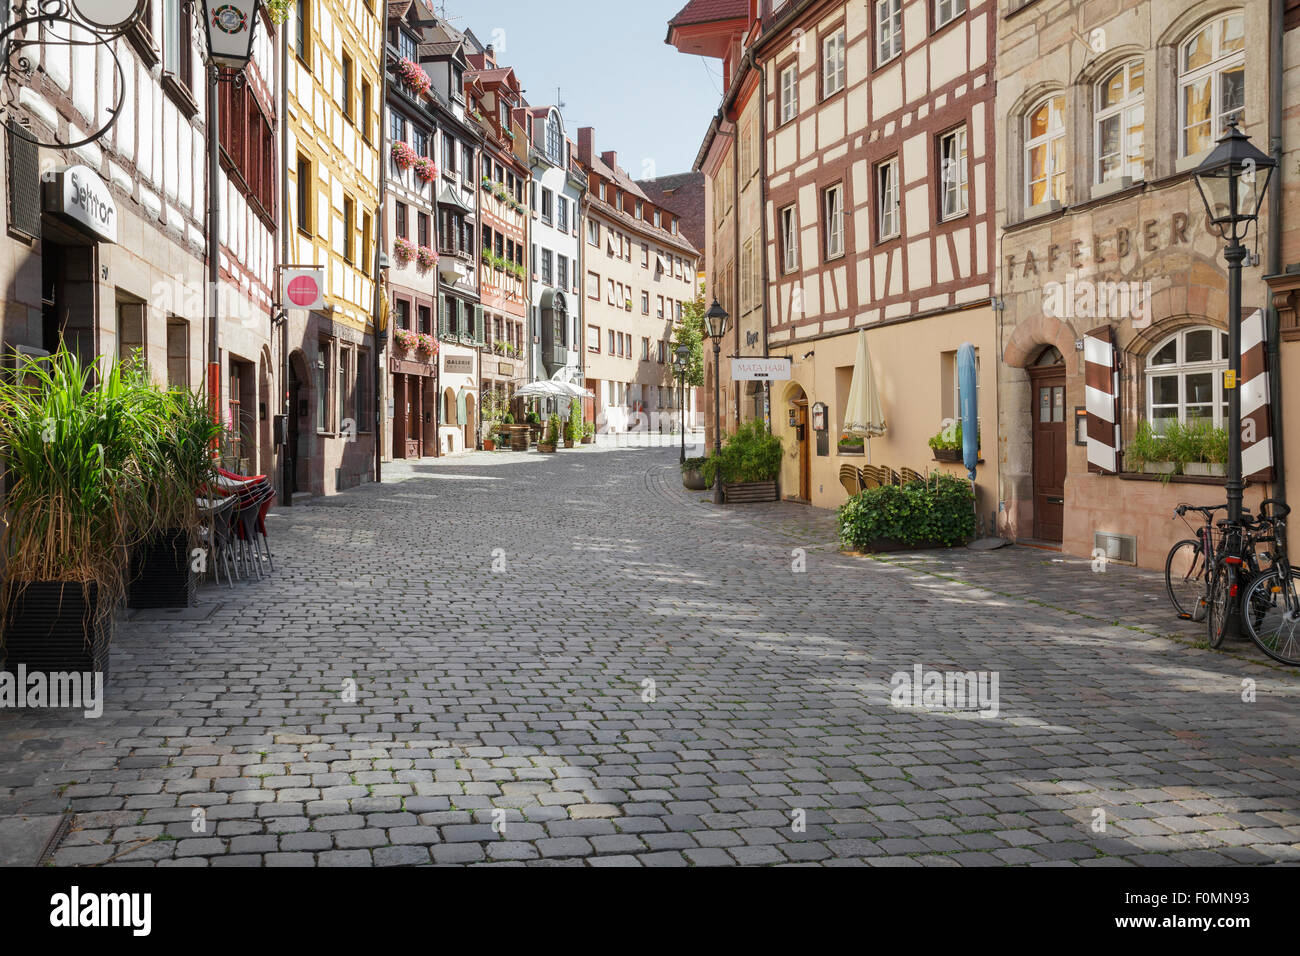 typical architecture, street in the old town, Weissgerbergasse, Nuremberg, Bavaria, Germany Stock Photo